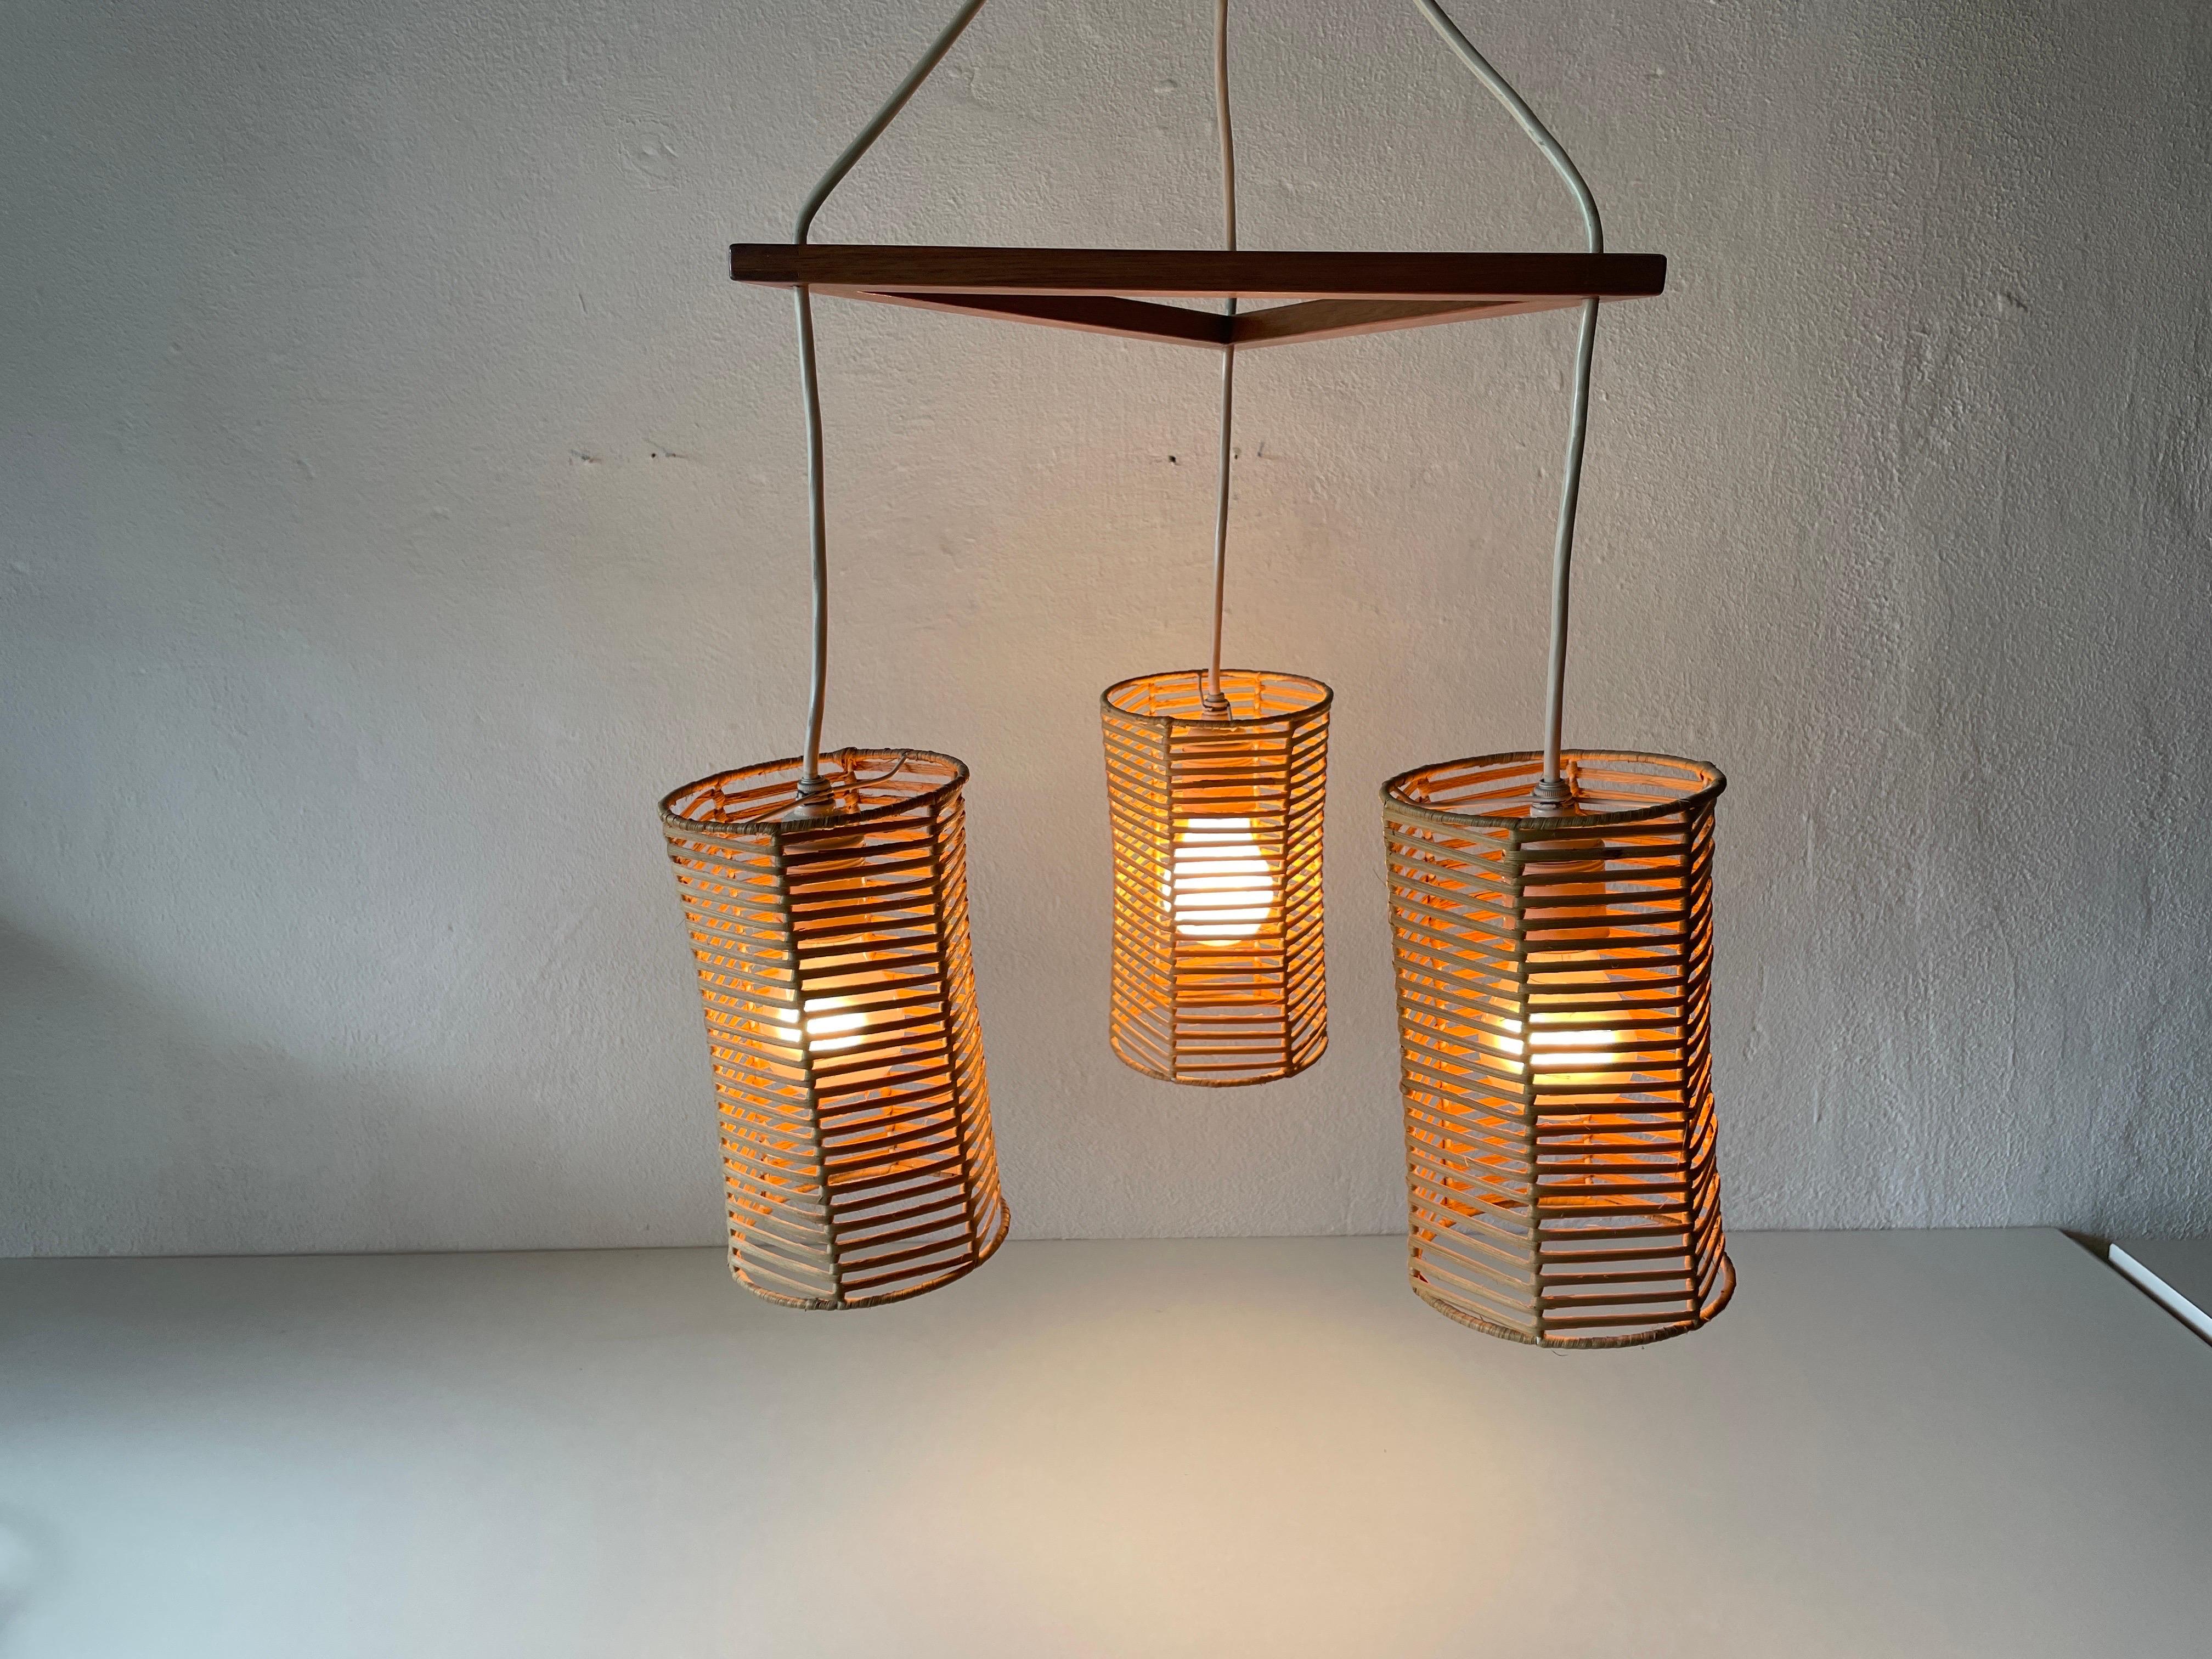 Triple Shade Wicker and Wood Pendant Lamp, 1960s, Germany For Sale 12